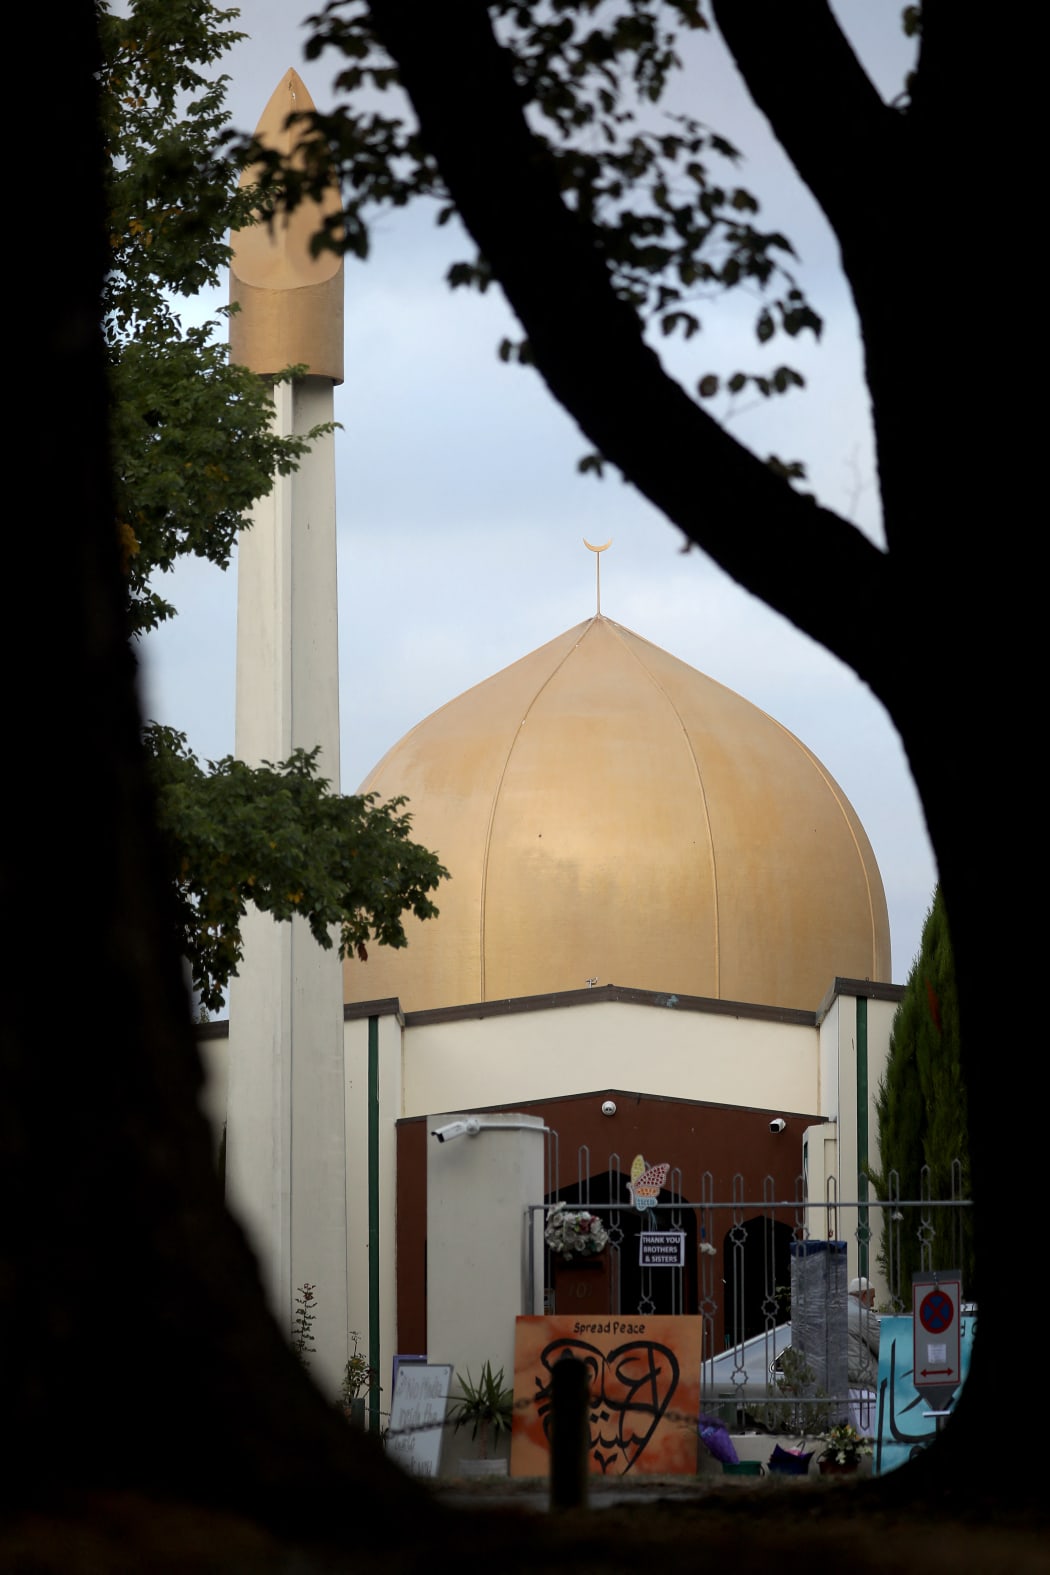 Al Noor mosque in Christchurch, New Zealand on March 15, 2020.